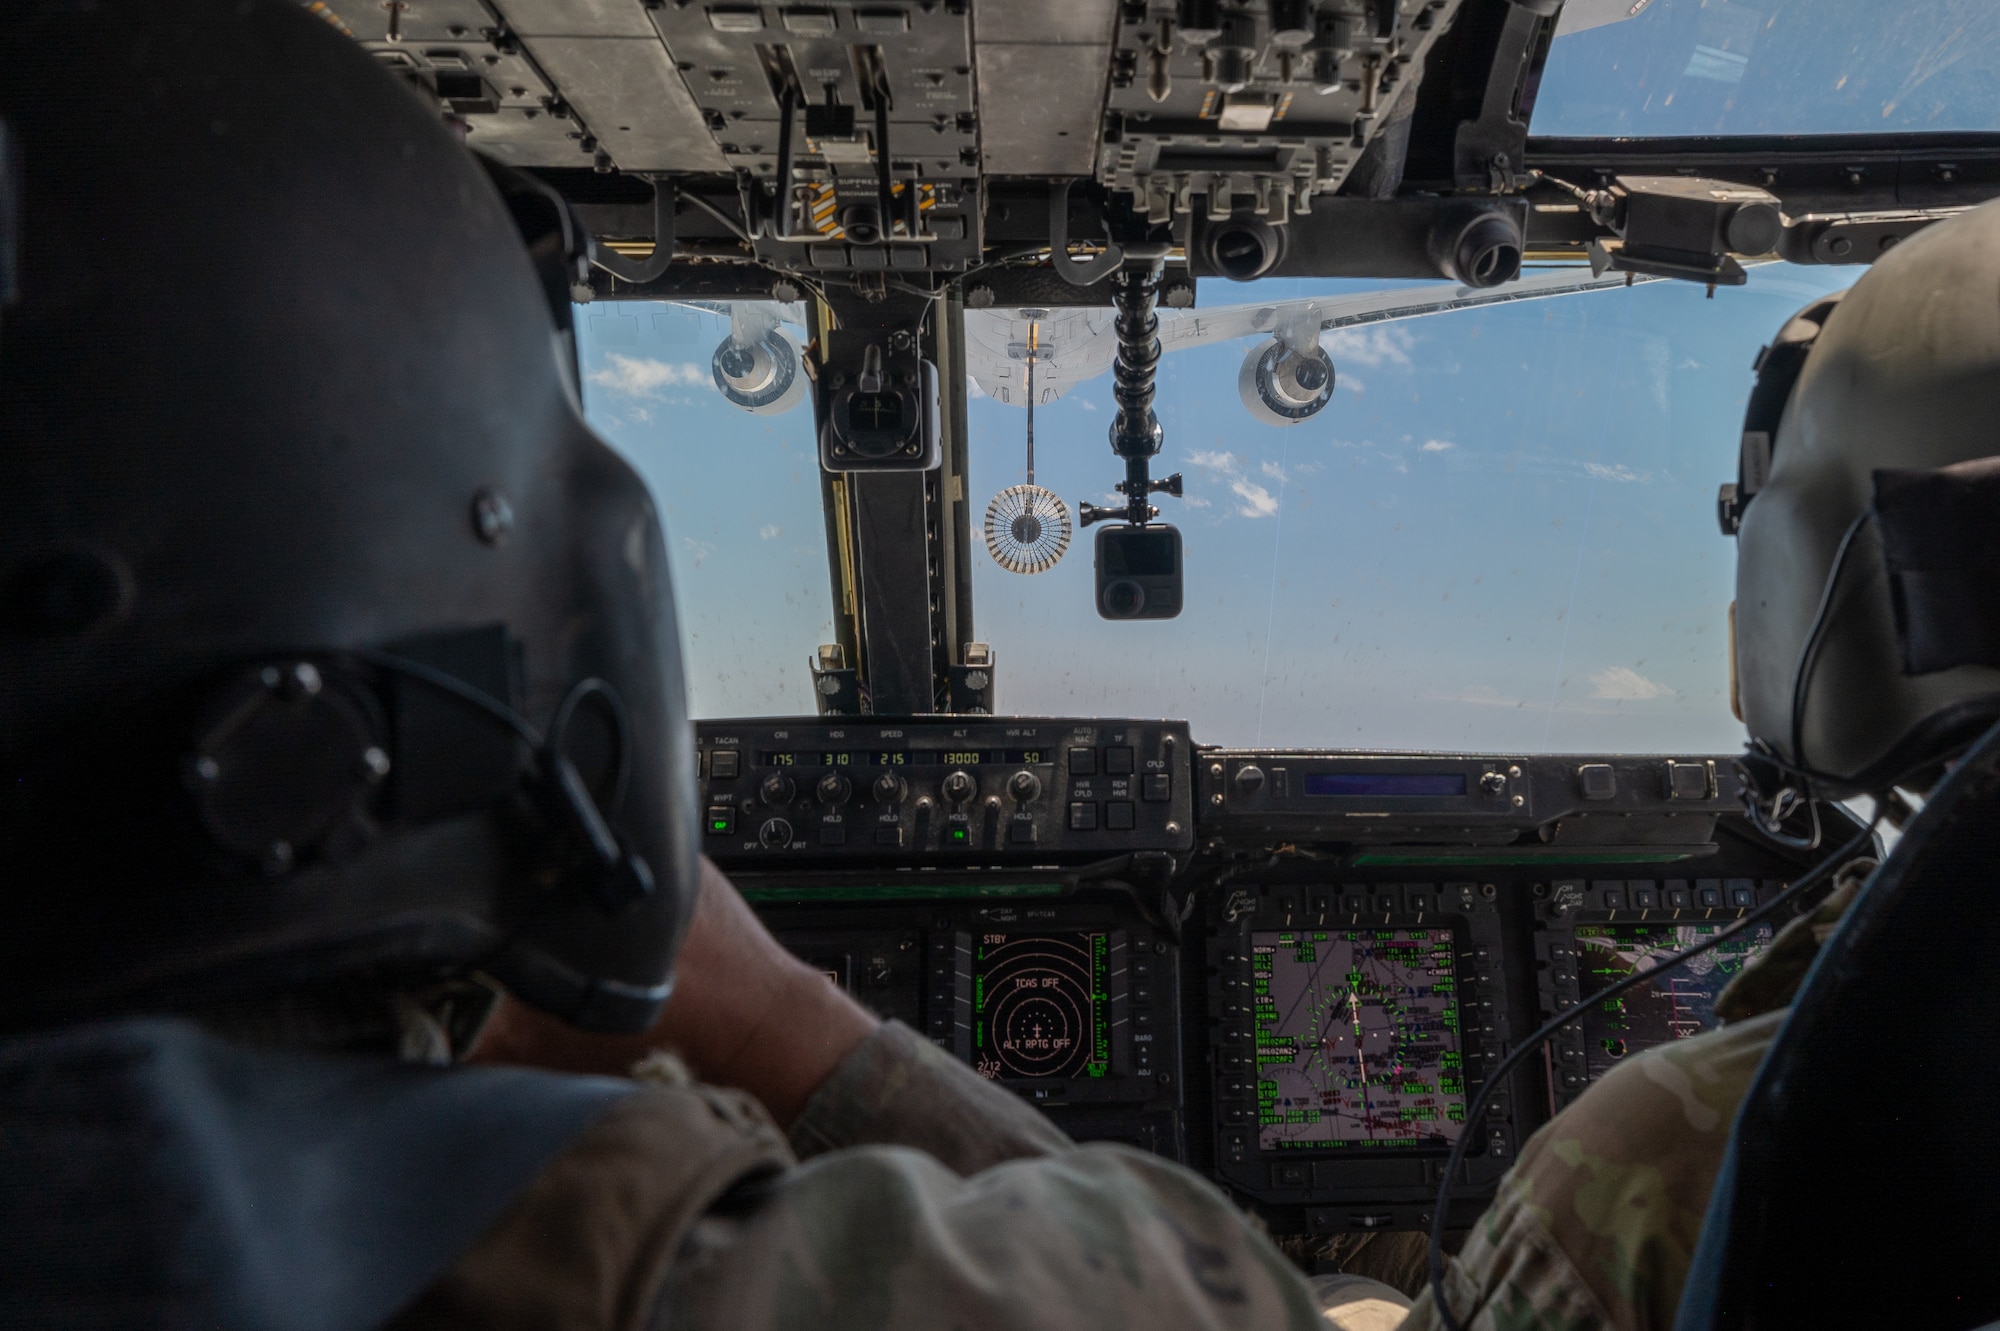 A photo from the cockpit of a CV-22.